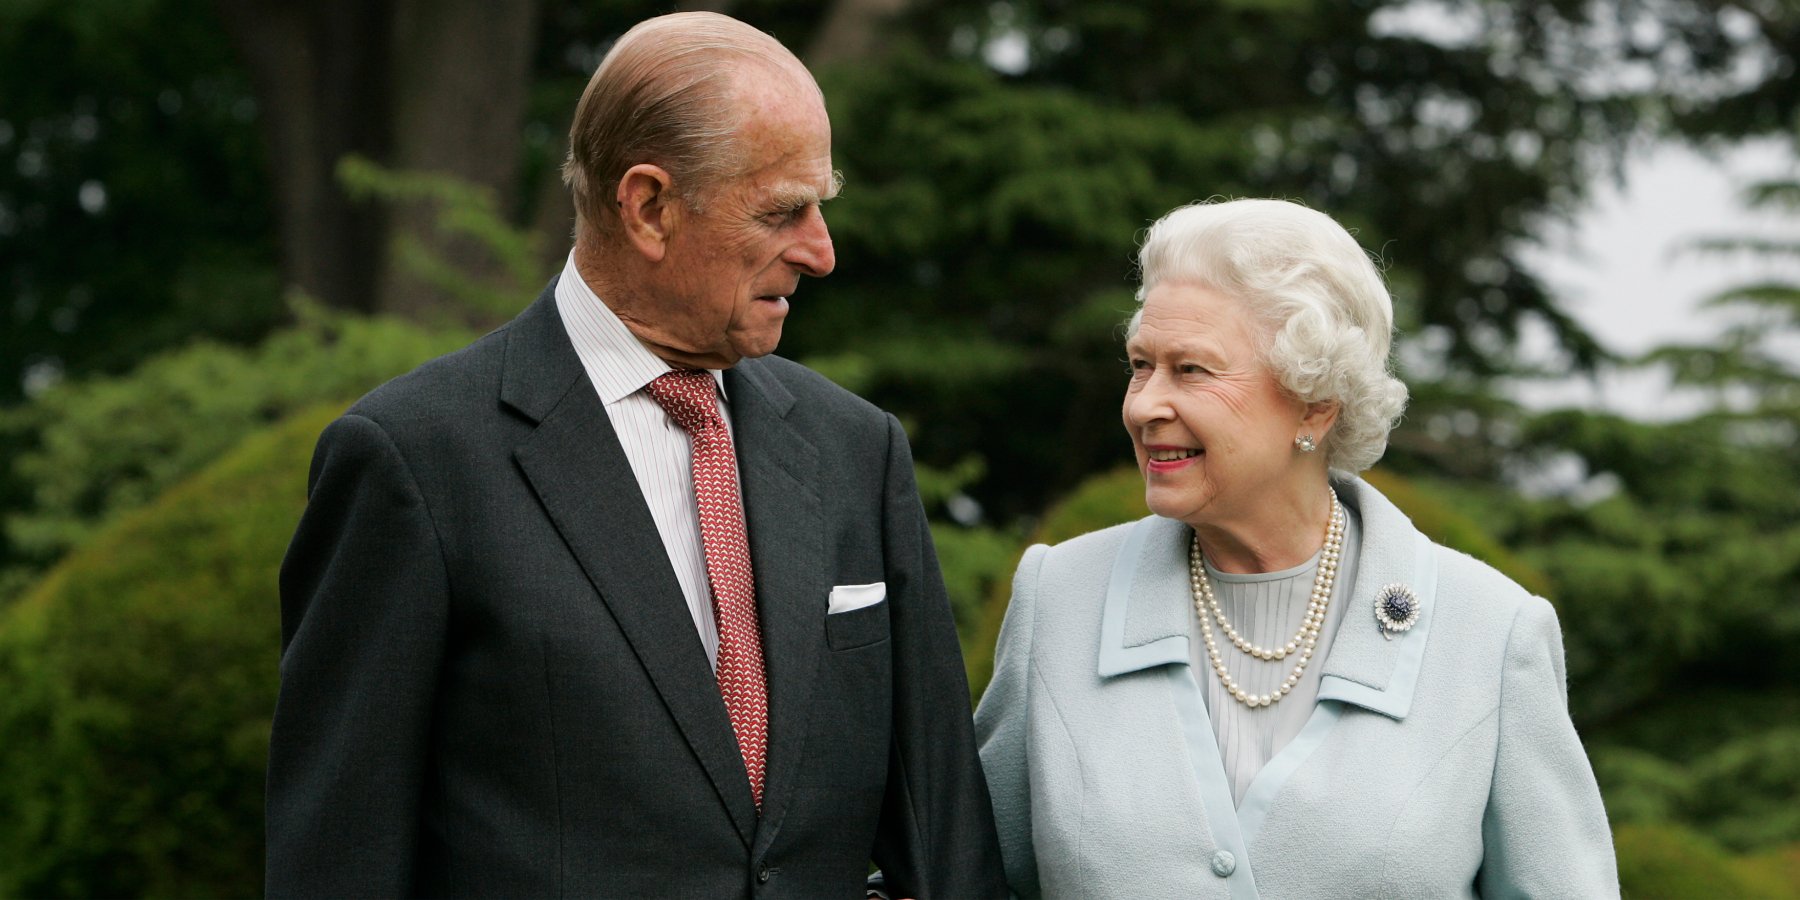 Queen Elizabeth Predicted it ‘Wouldn’t Be Long’ Until She Joined Prince Philip in Death, Says Royal Correspondent